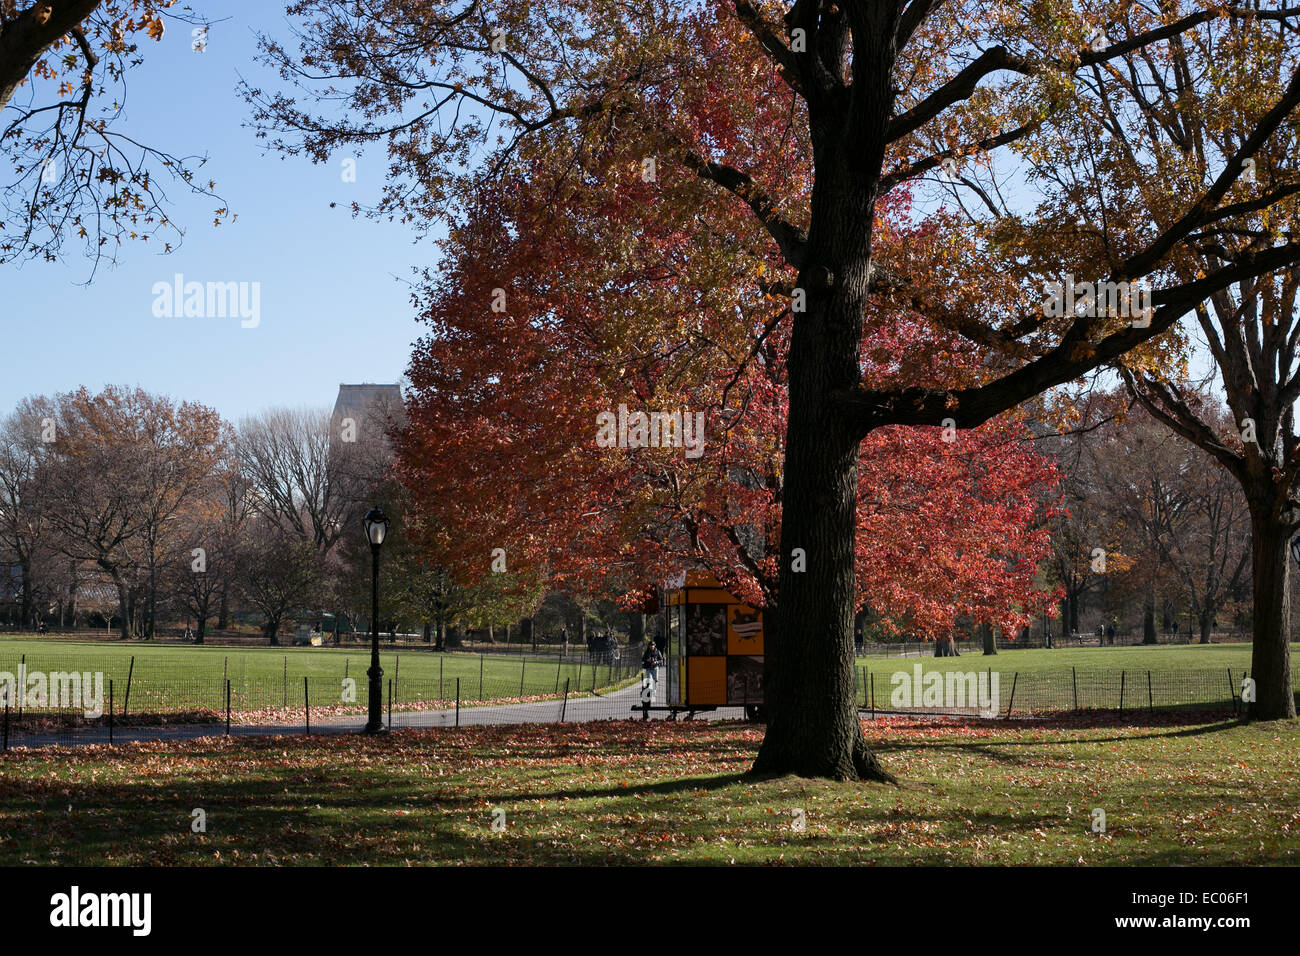 A vendor stand under a red leaved tree near the great lawn in Central Park, New York City. Stock Photo